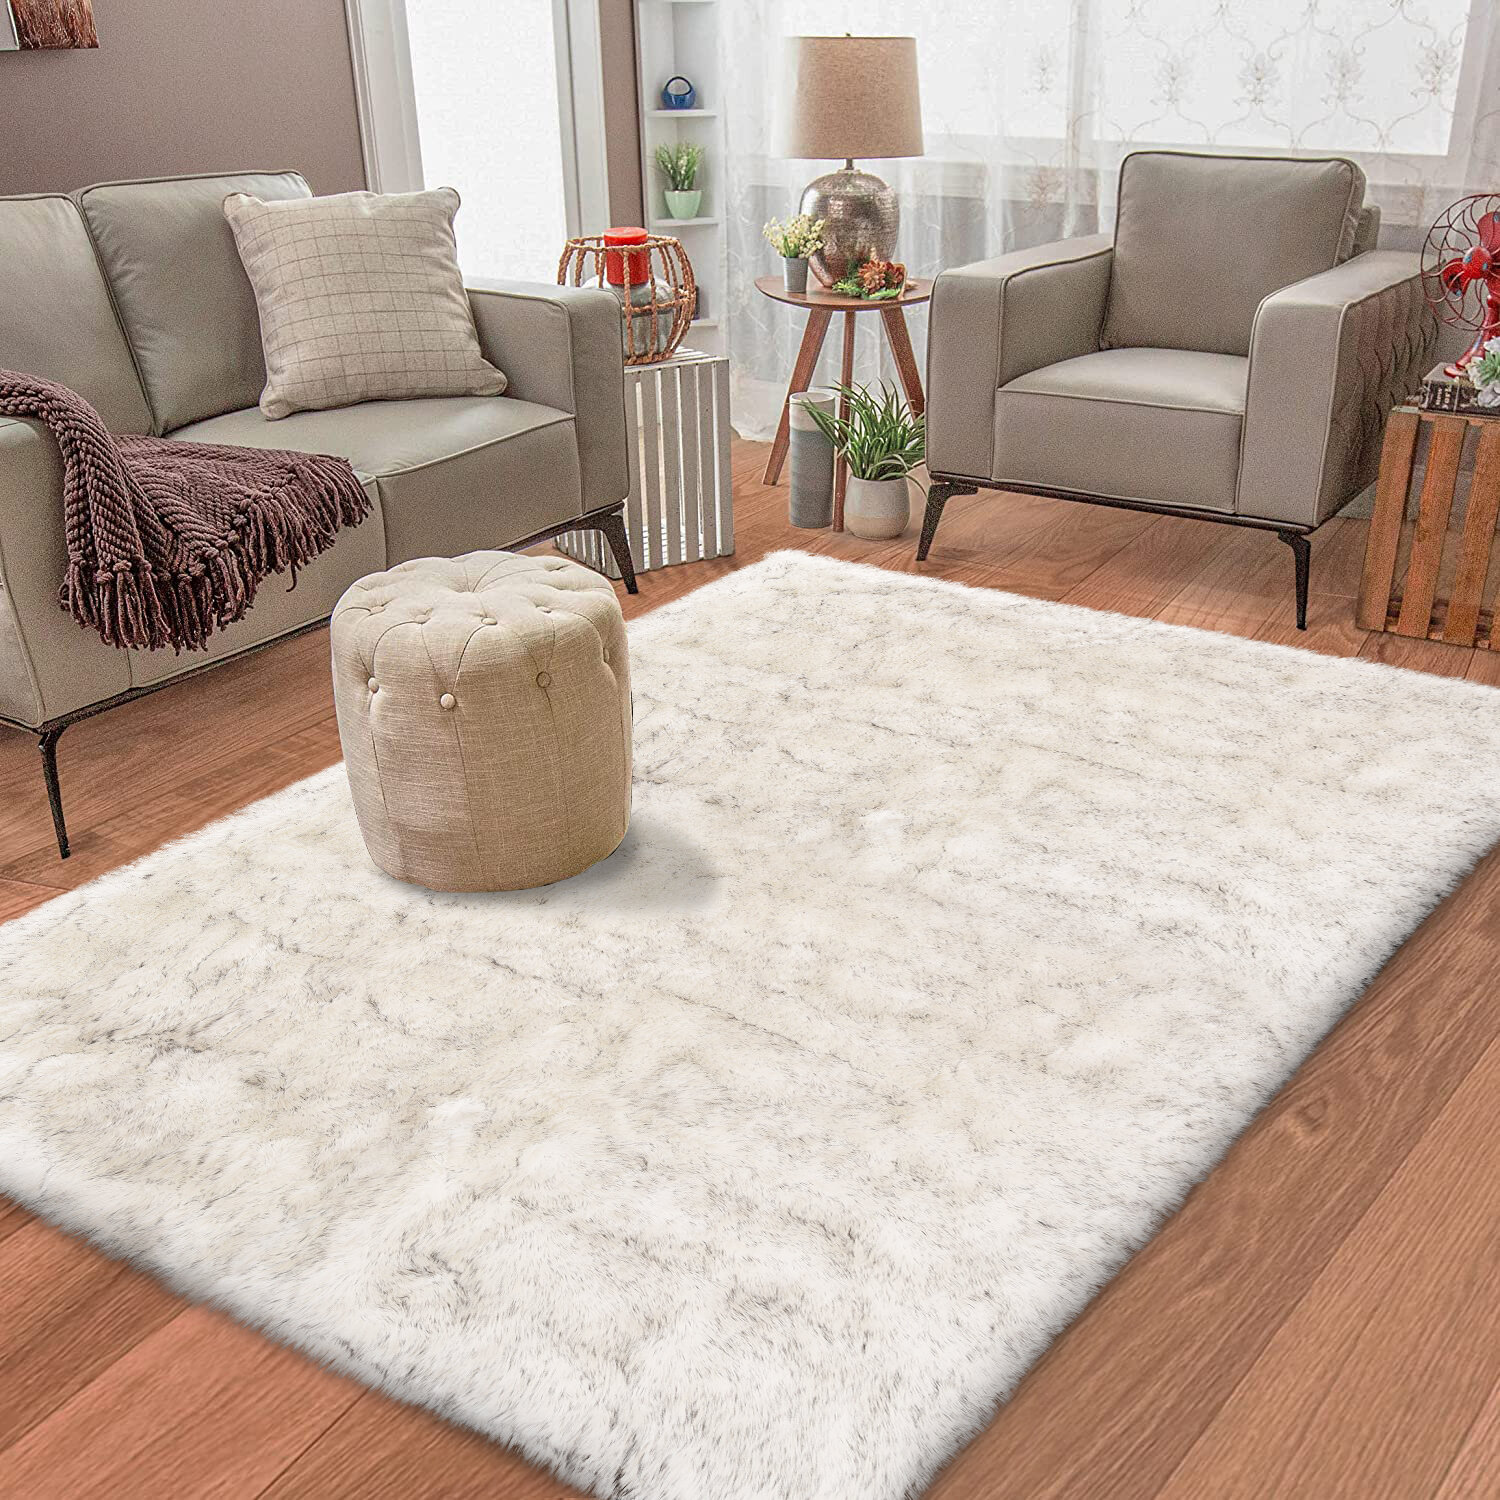 Wholesale Faux Sheepskin Carpet and Rugs for Living Room, Area Rug